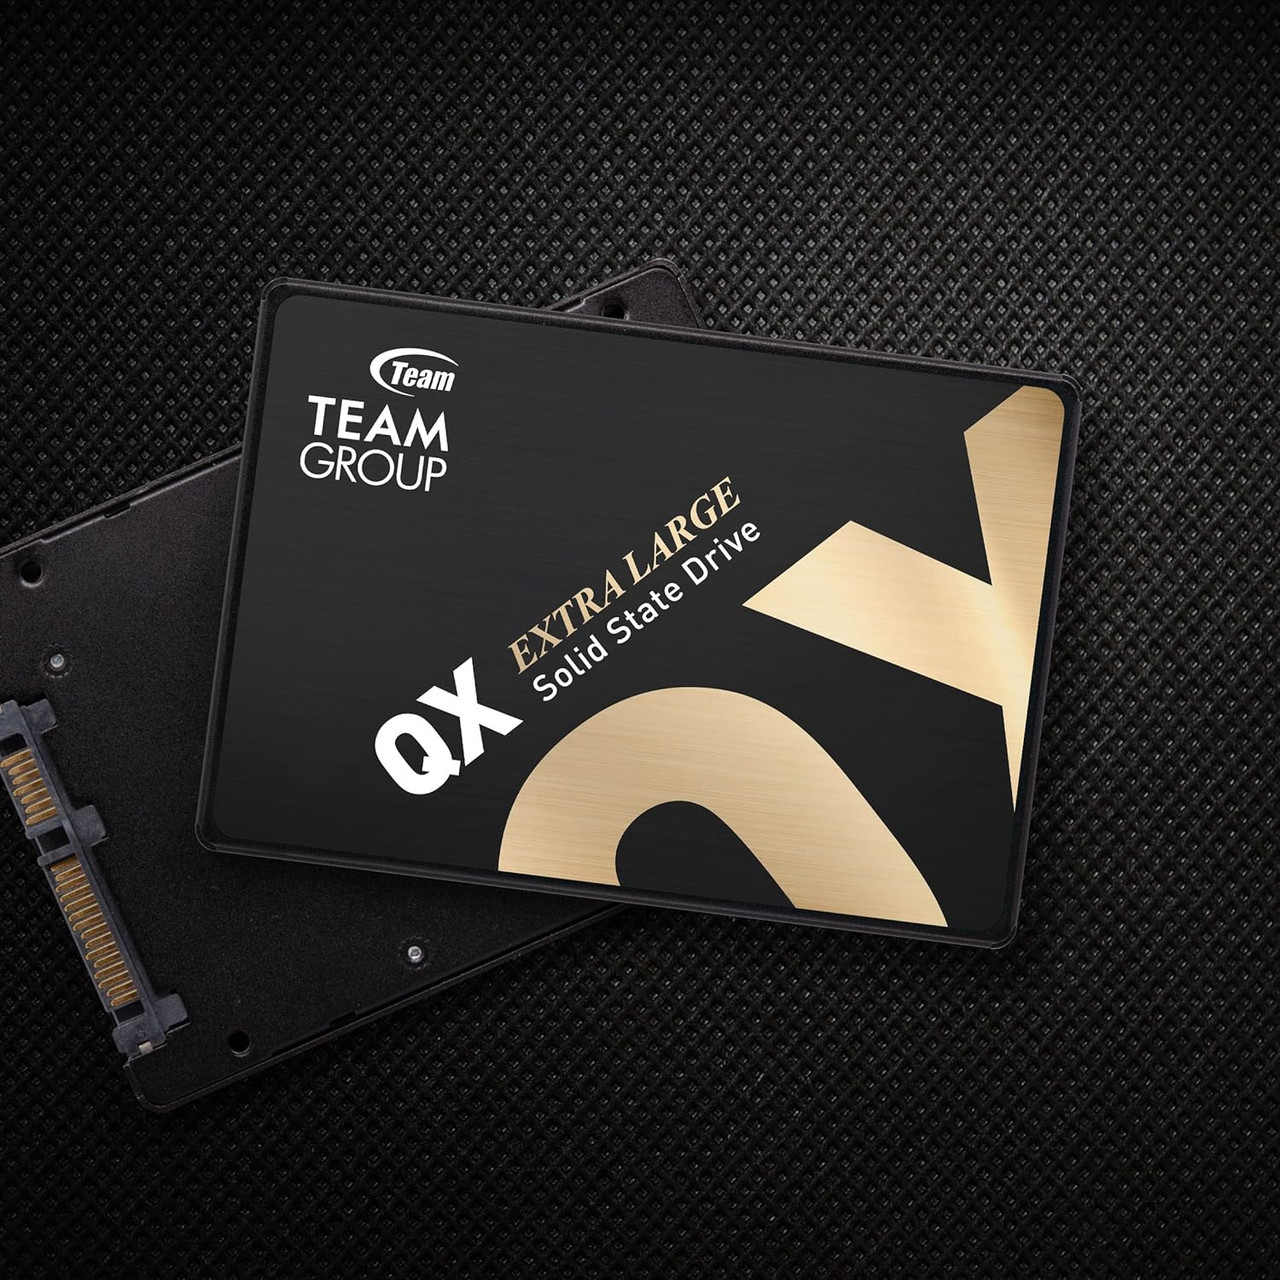 TEAMGROUP QX 4TB 3D NAND QLC 2.5 Inch SATA III Internal Solid State Drive SSD up to 560 MB/s T253X7004T0C101